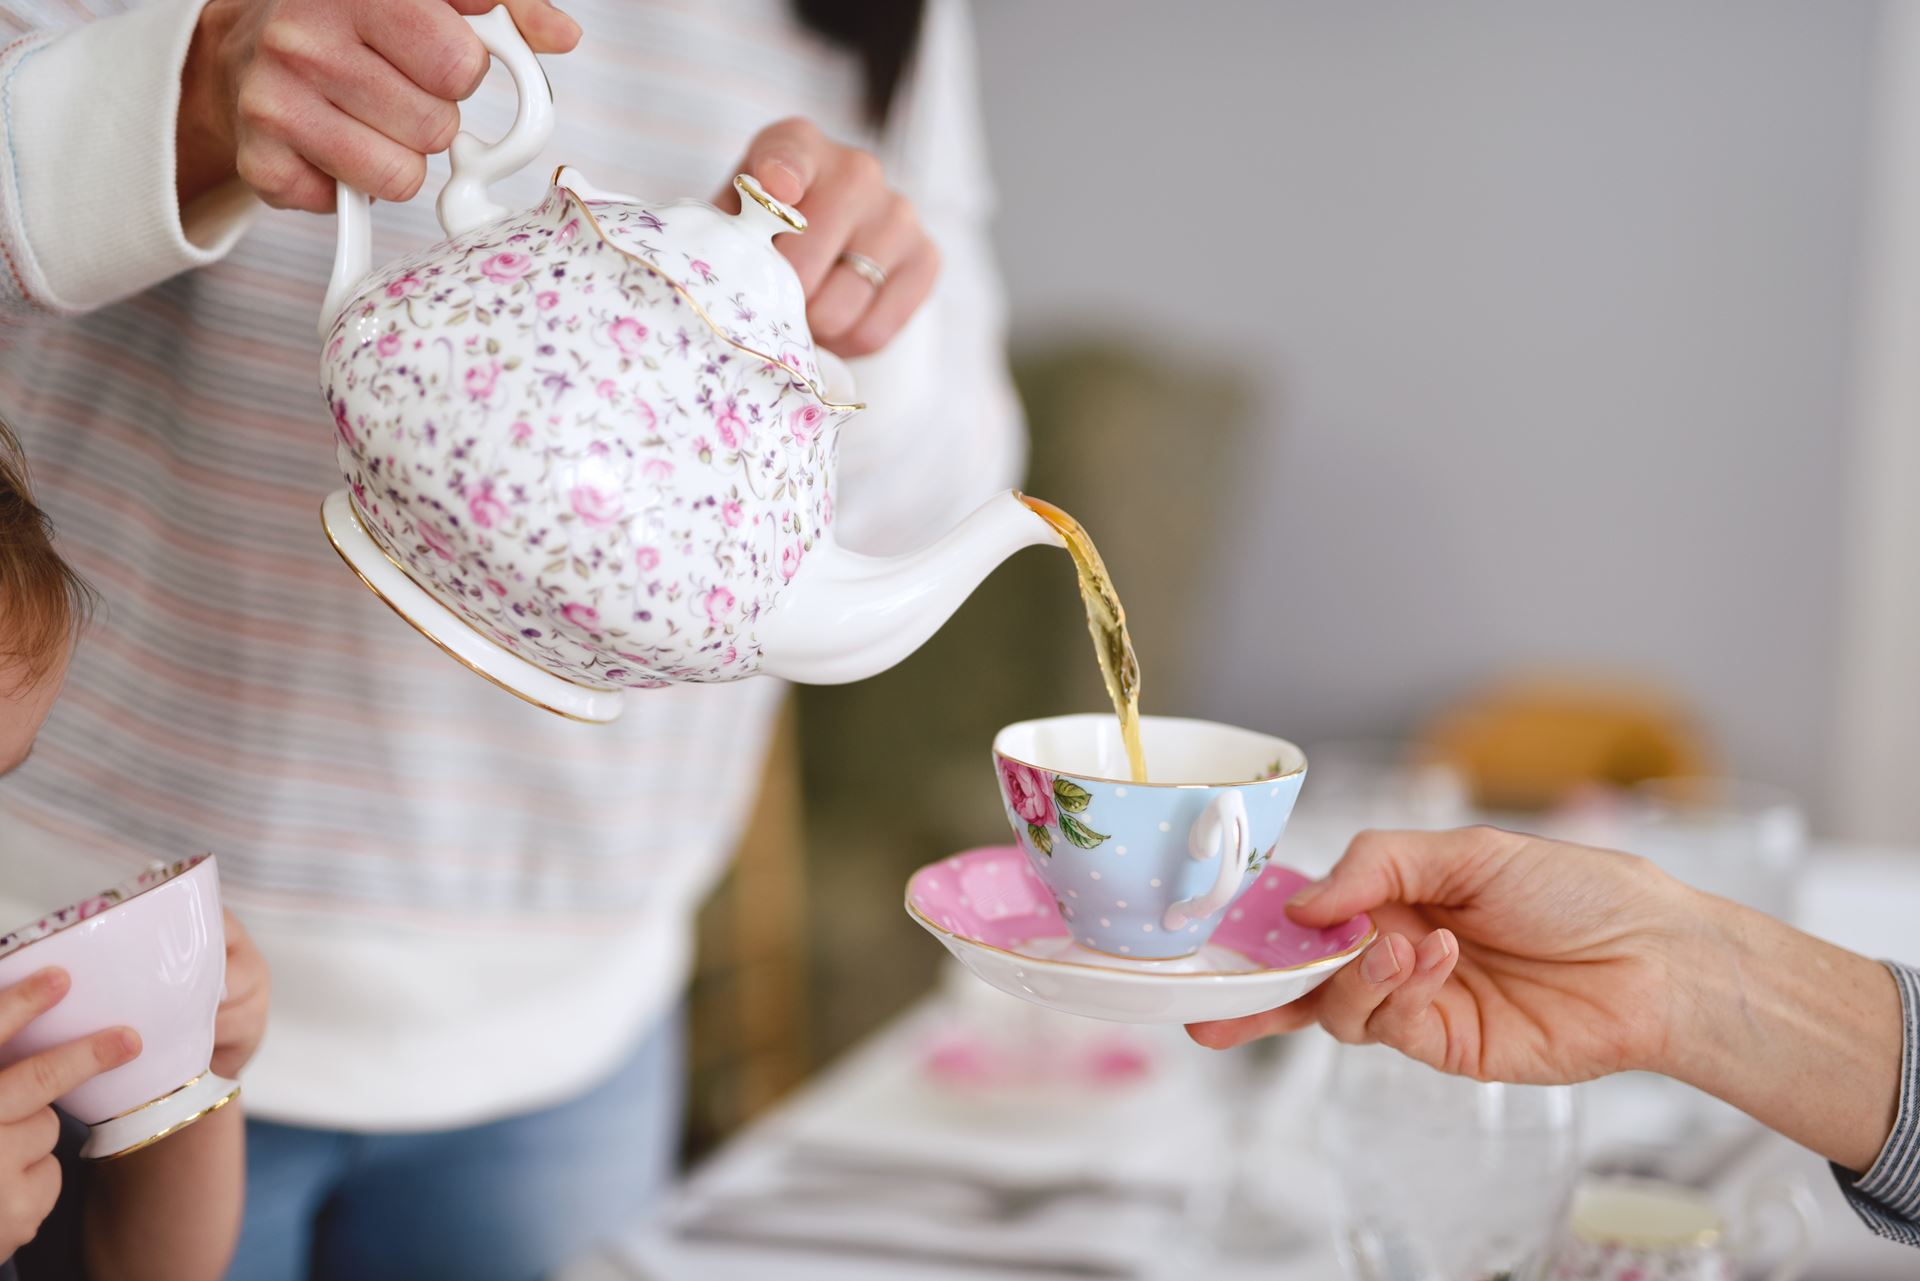 a person pouring a cup of tea from a teapot